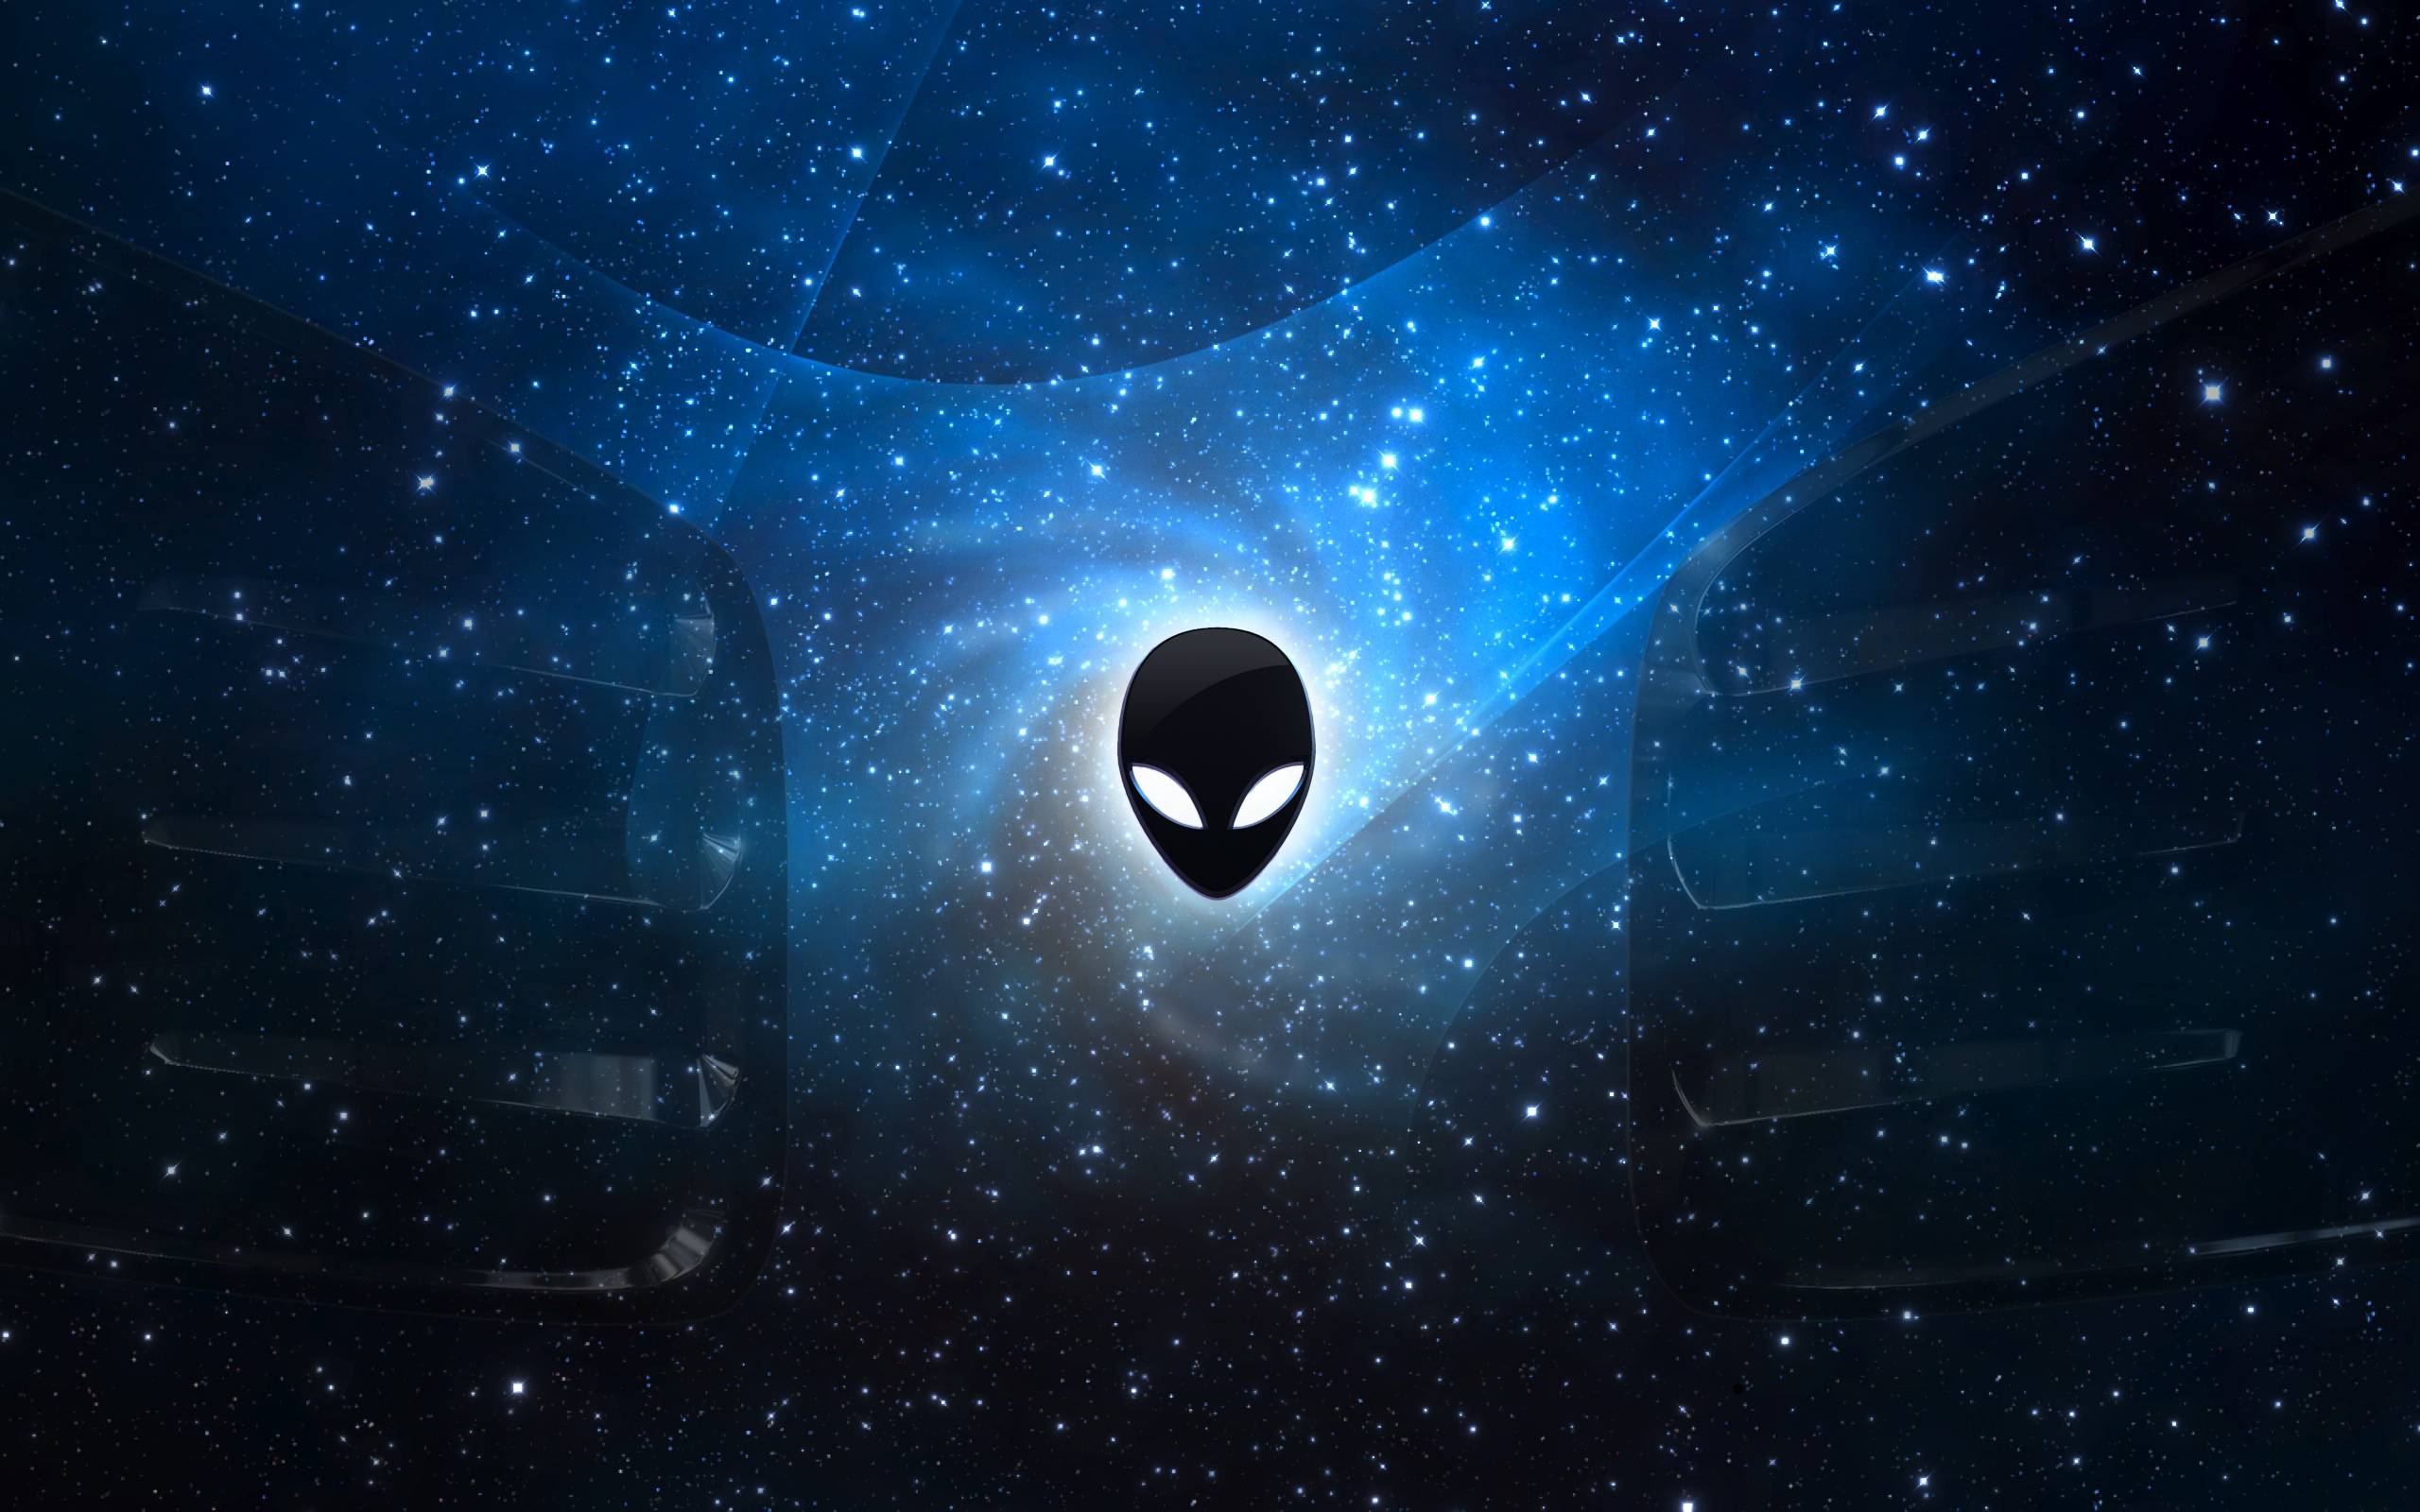 Alienware Wallpapers Pack - Galaxy Wallpapers For Laptop - 2560x1600  Wallpaper 